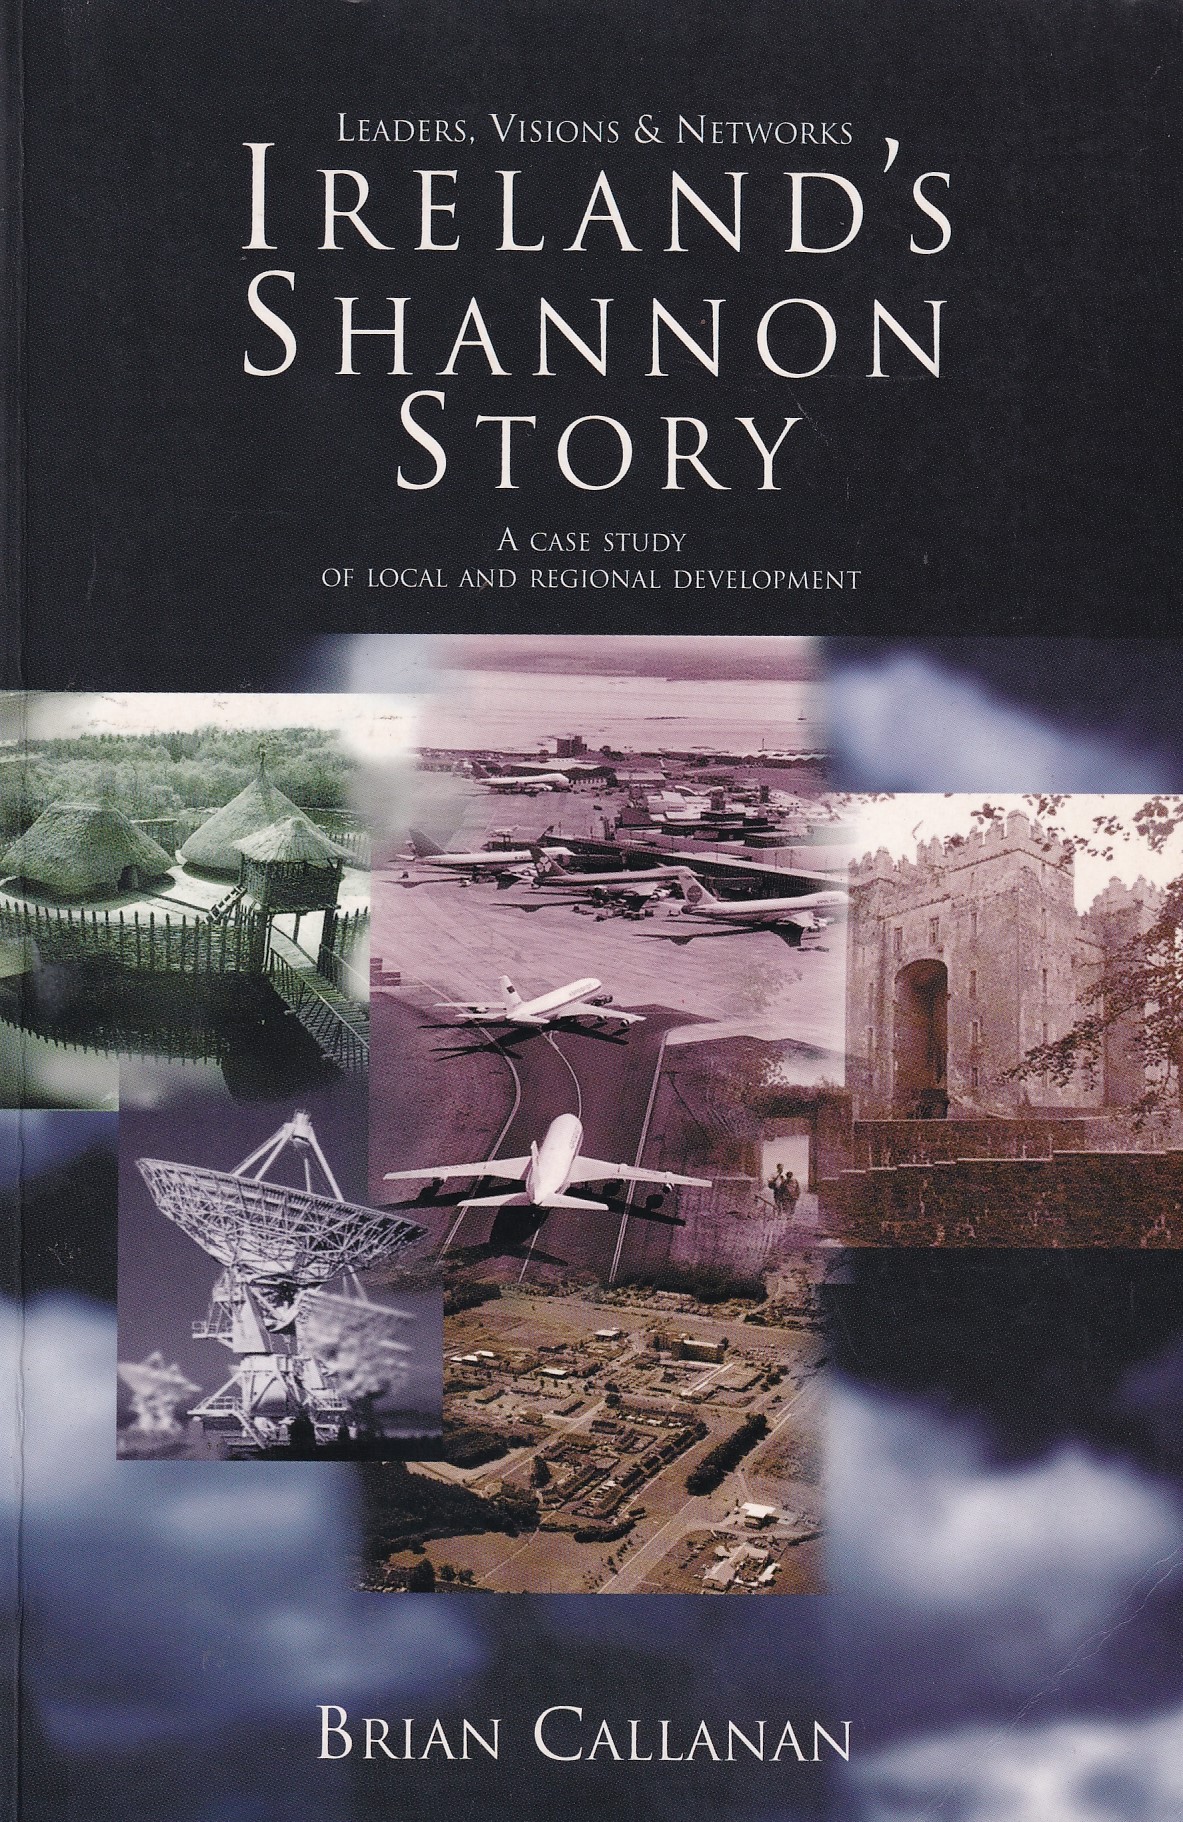 Ireland’s Shannon Story: Leaders, Visions and Networks – A Case Study of Local and Regional Development | Callanan, Brian | Charlie Byrne's